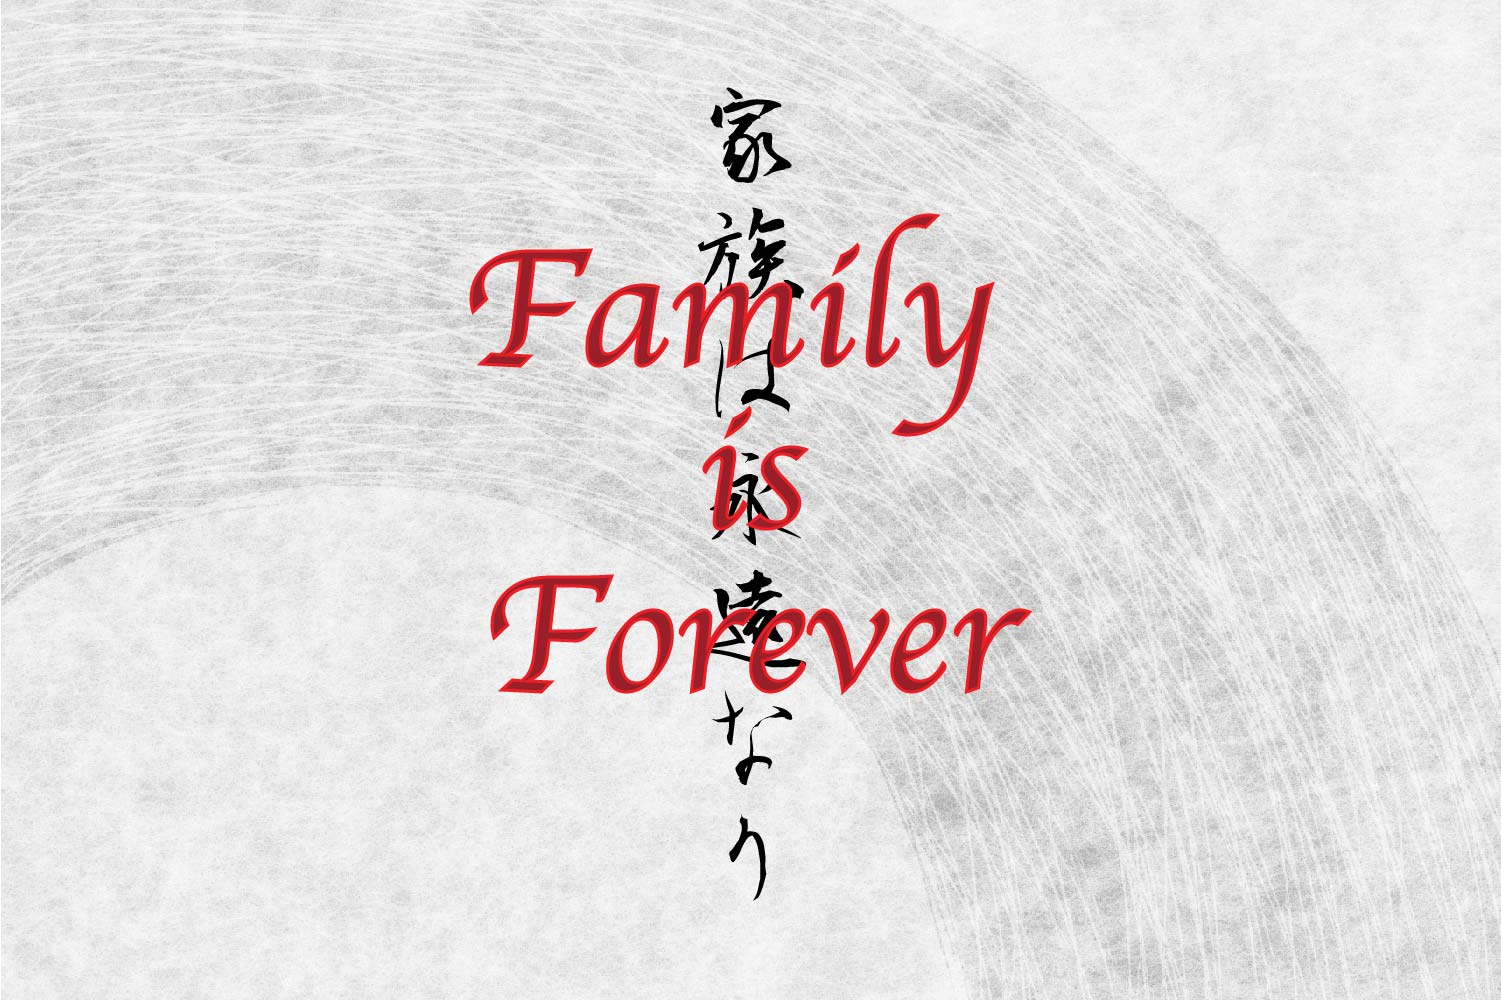 Family is forever in Japanese writing for tattoo